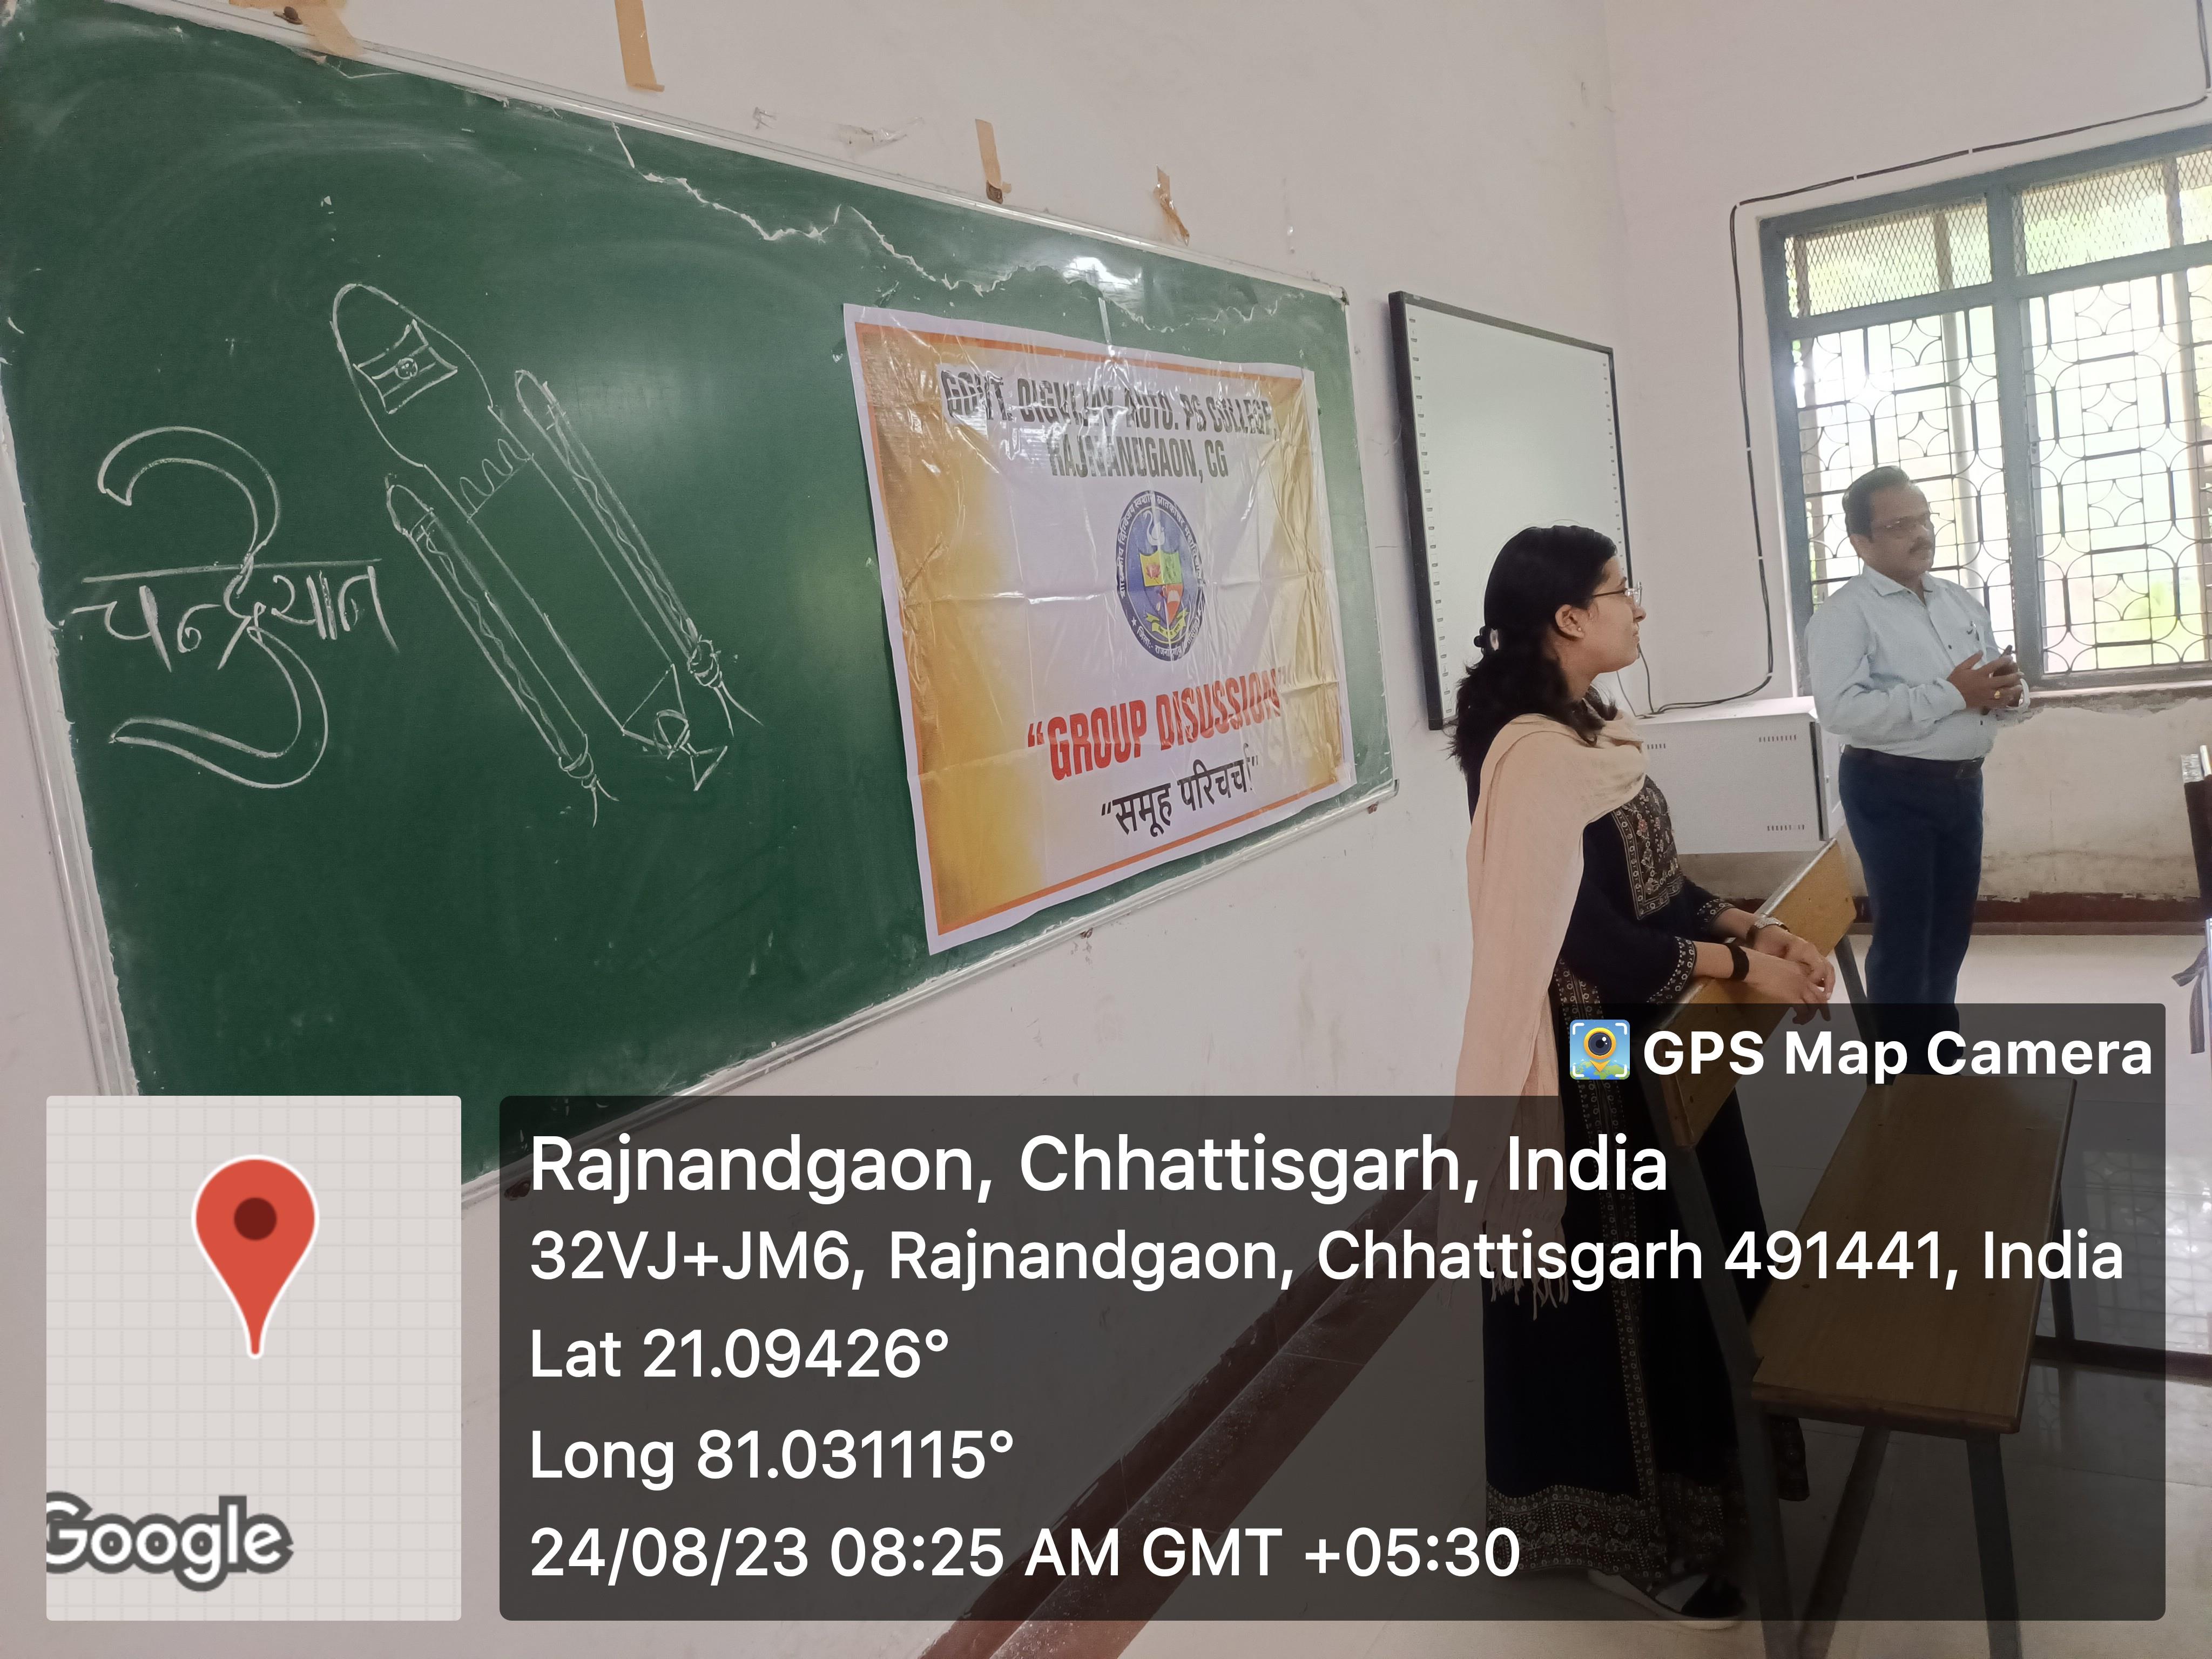 Govt. Digvijay Autonomous College-Group discussion organized by Commerce Department on Chandrayan -3